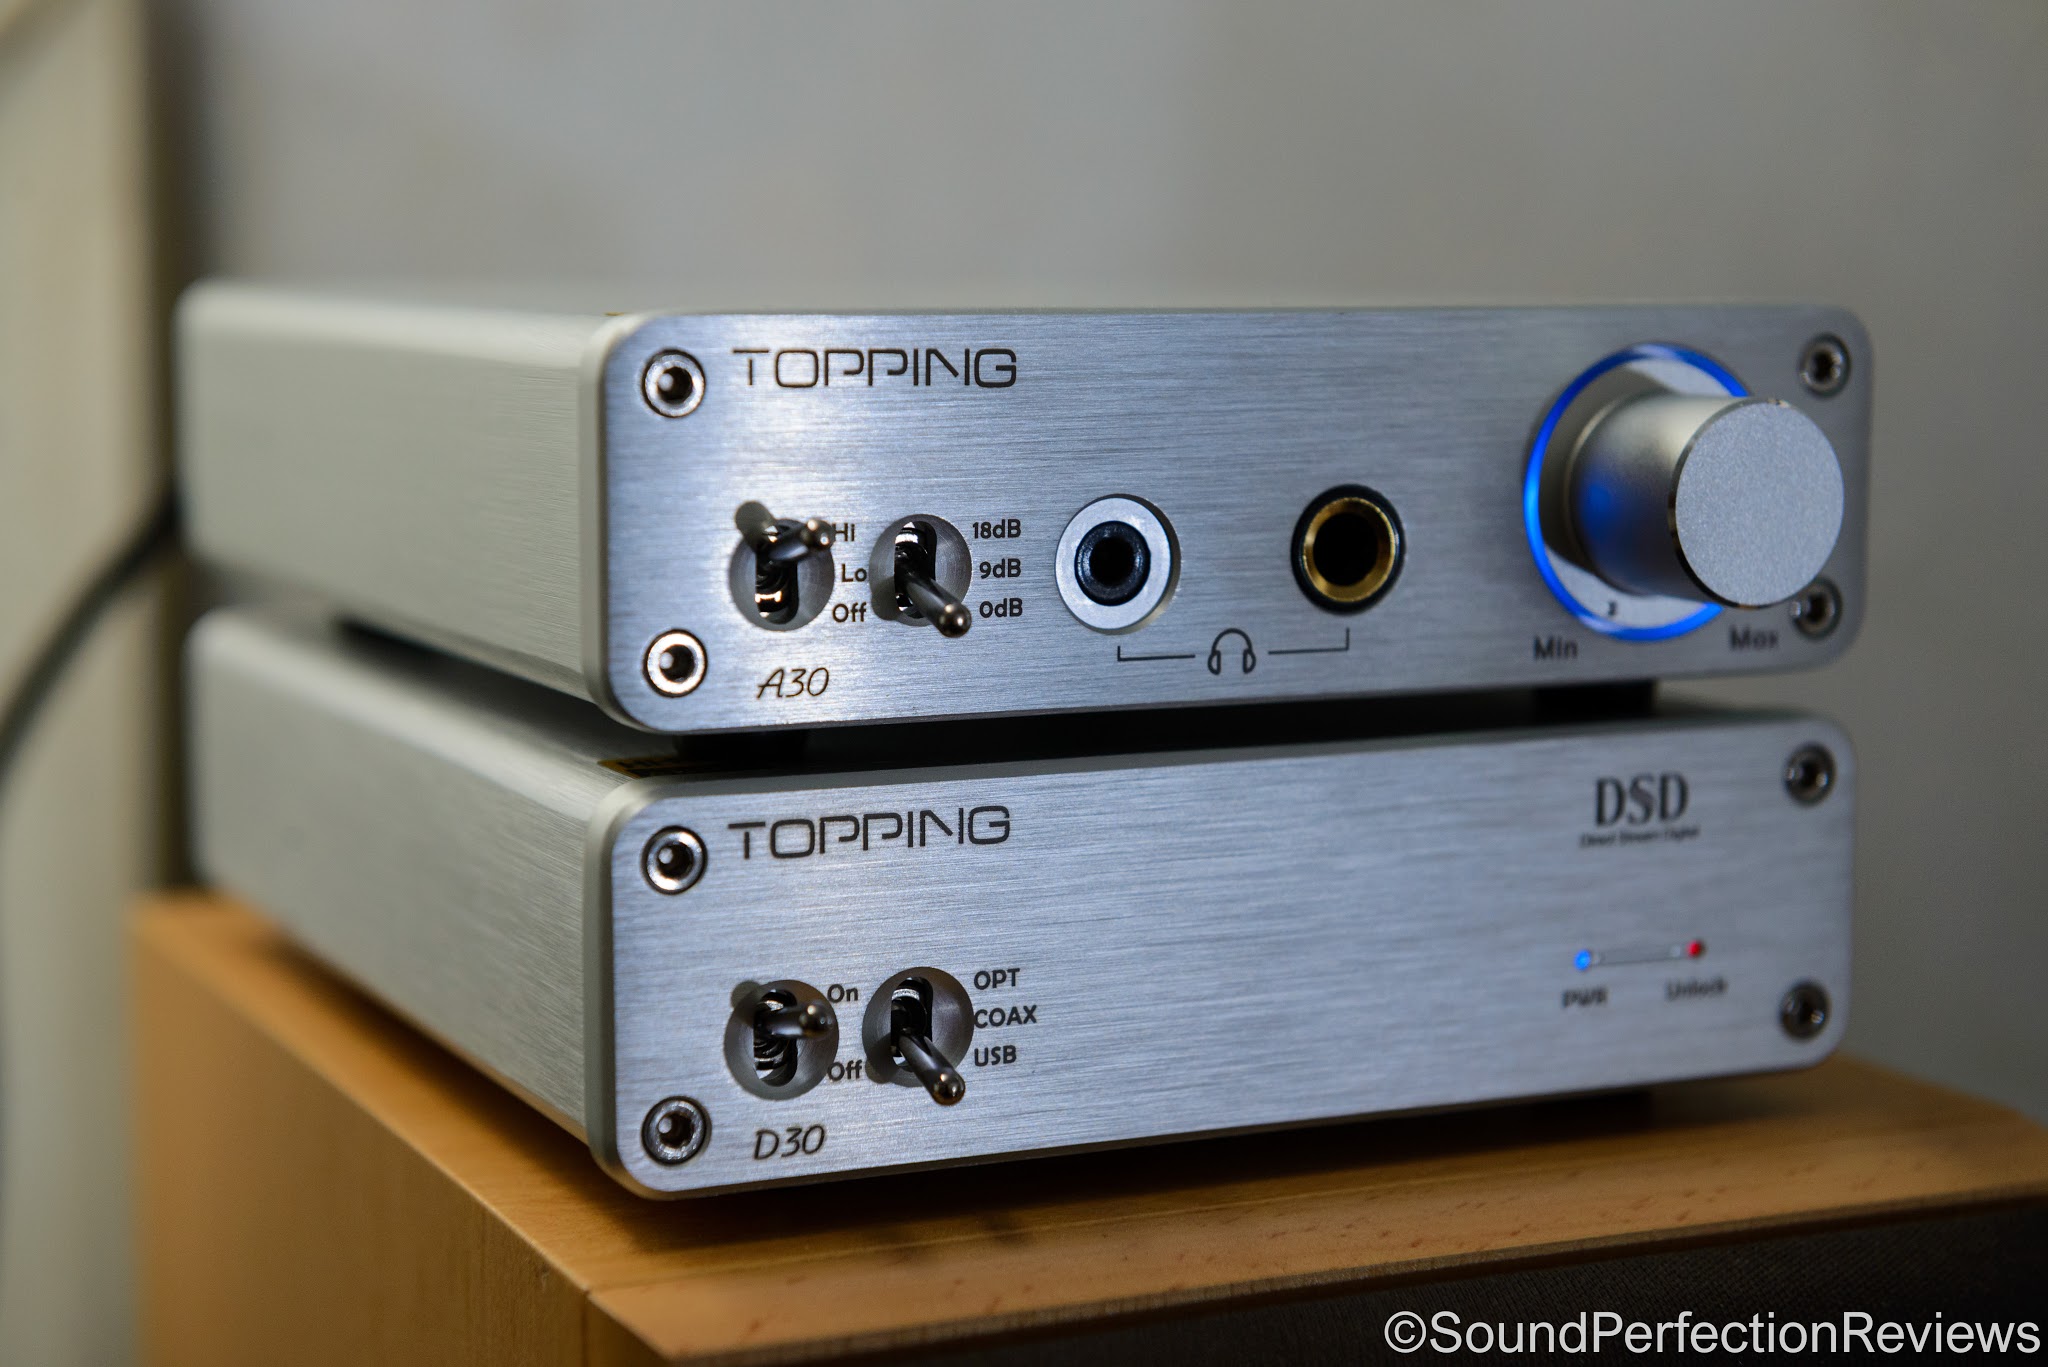 Review: Topping D30 DAC and A30 Headphone Amplifier (Bargain brilliance)